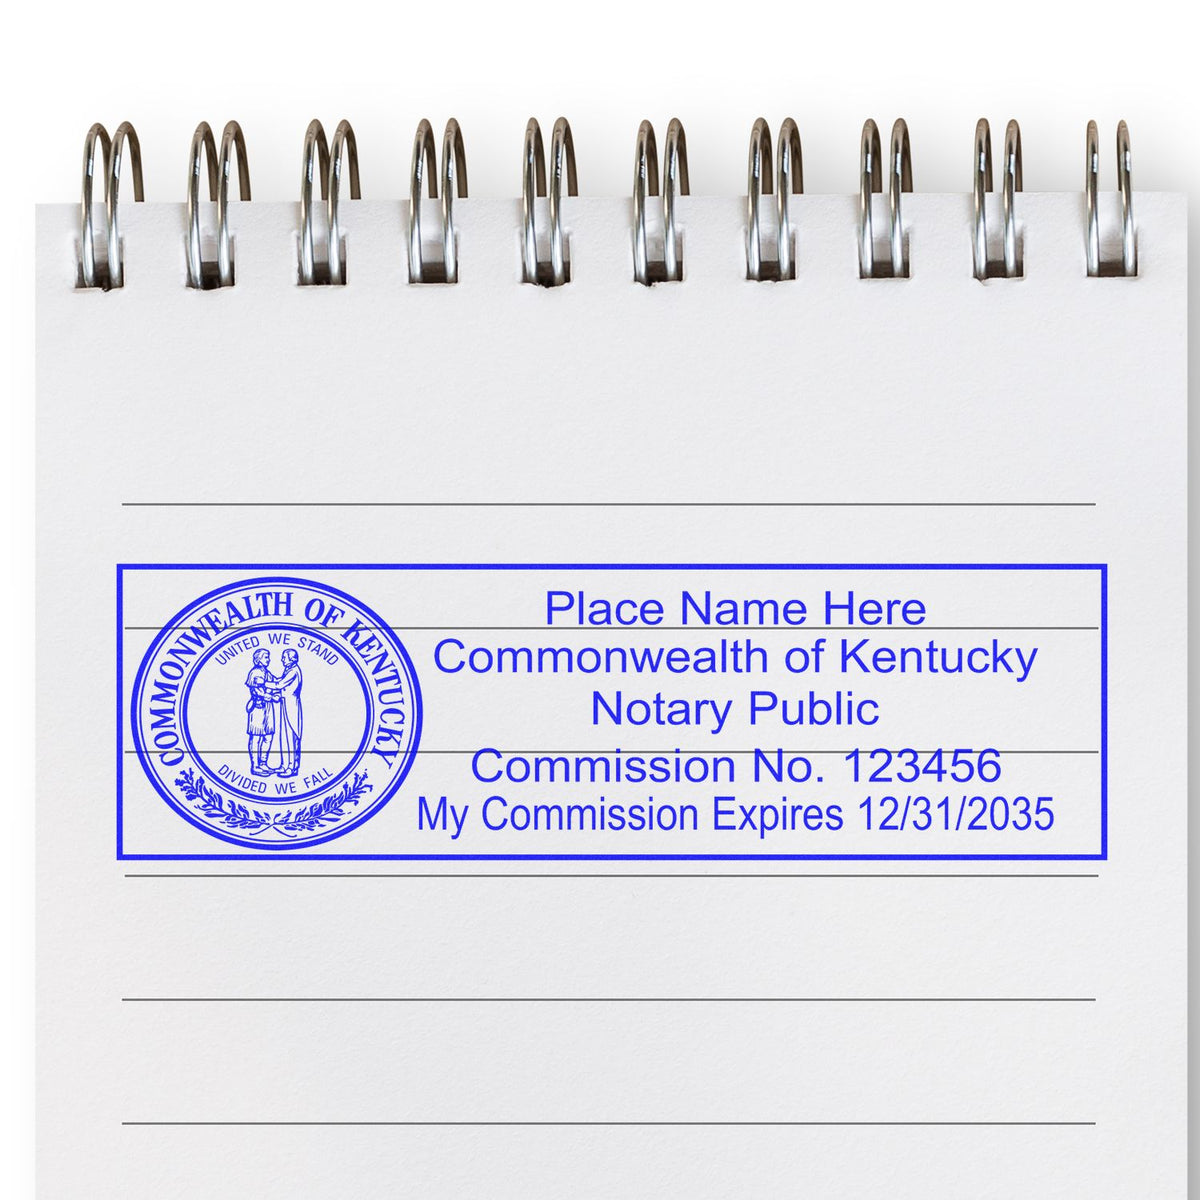 Slim Pre-Inked State Seal Notary Stamp for Kentucky in use photo showing a stamped imprint of the Slim Pre-Inked State Seal Notary Stamp for Kentucky